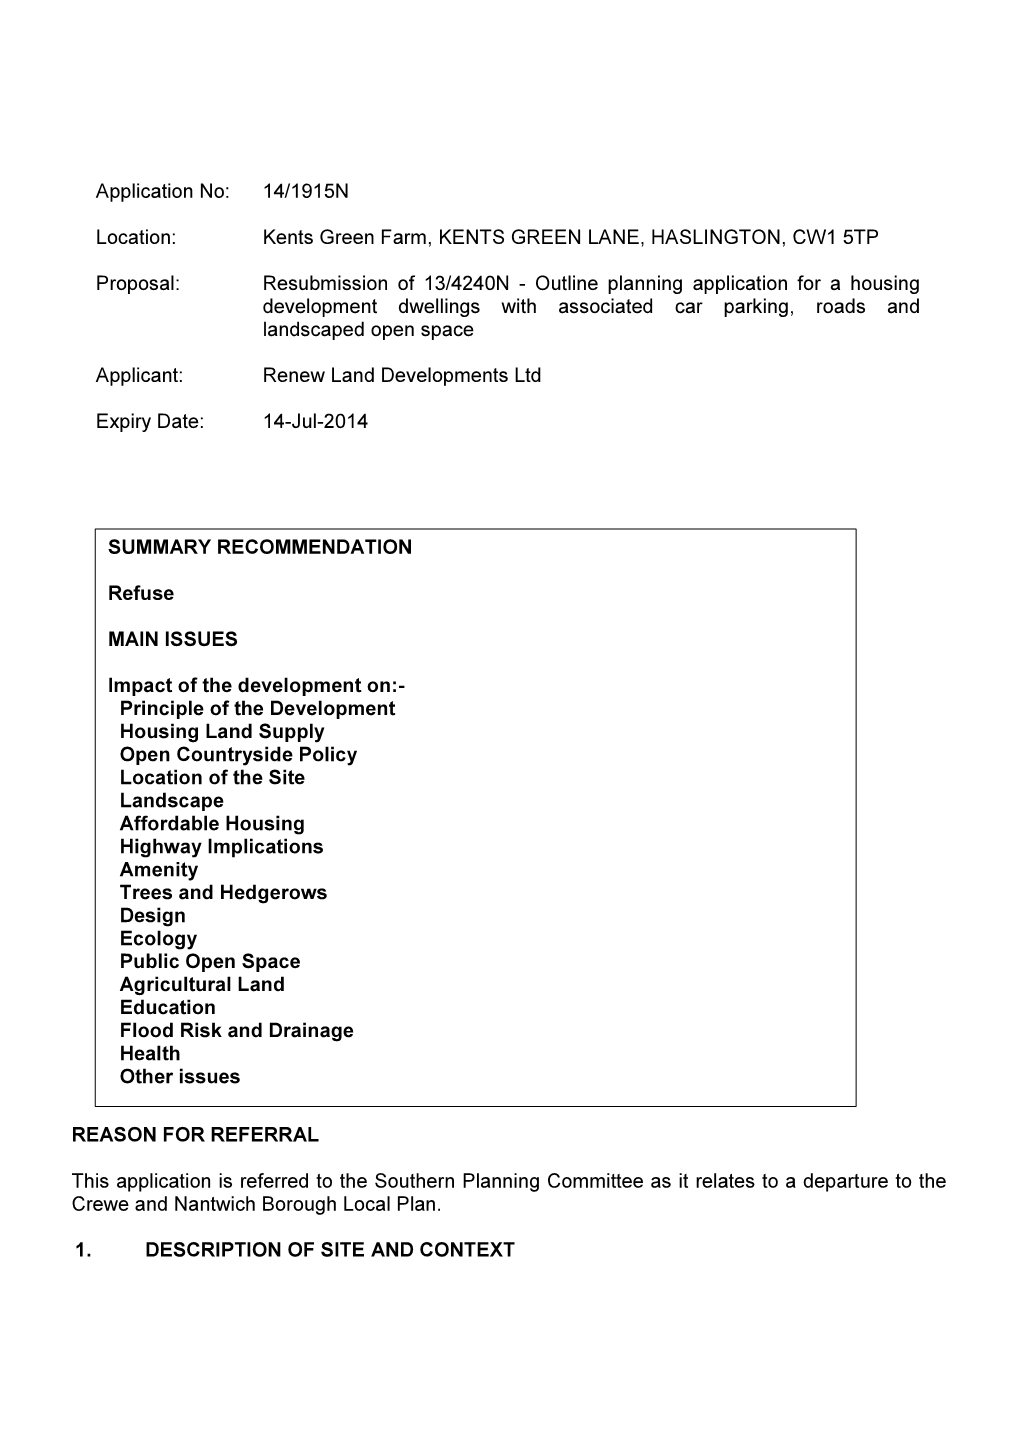 Resubmission of 13/4240N - Outline Planning Application for a Housing Development Dwellings with Associated Car Parking, Roads and Landscaped Open Space